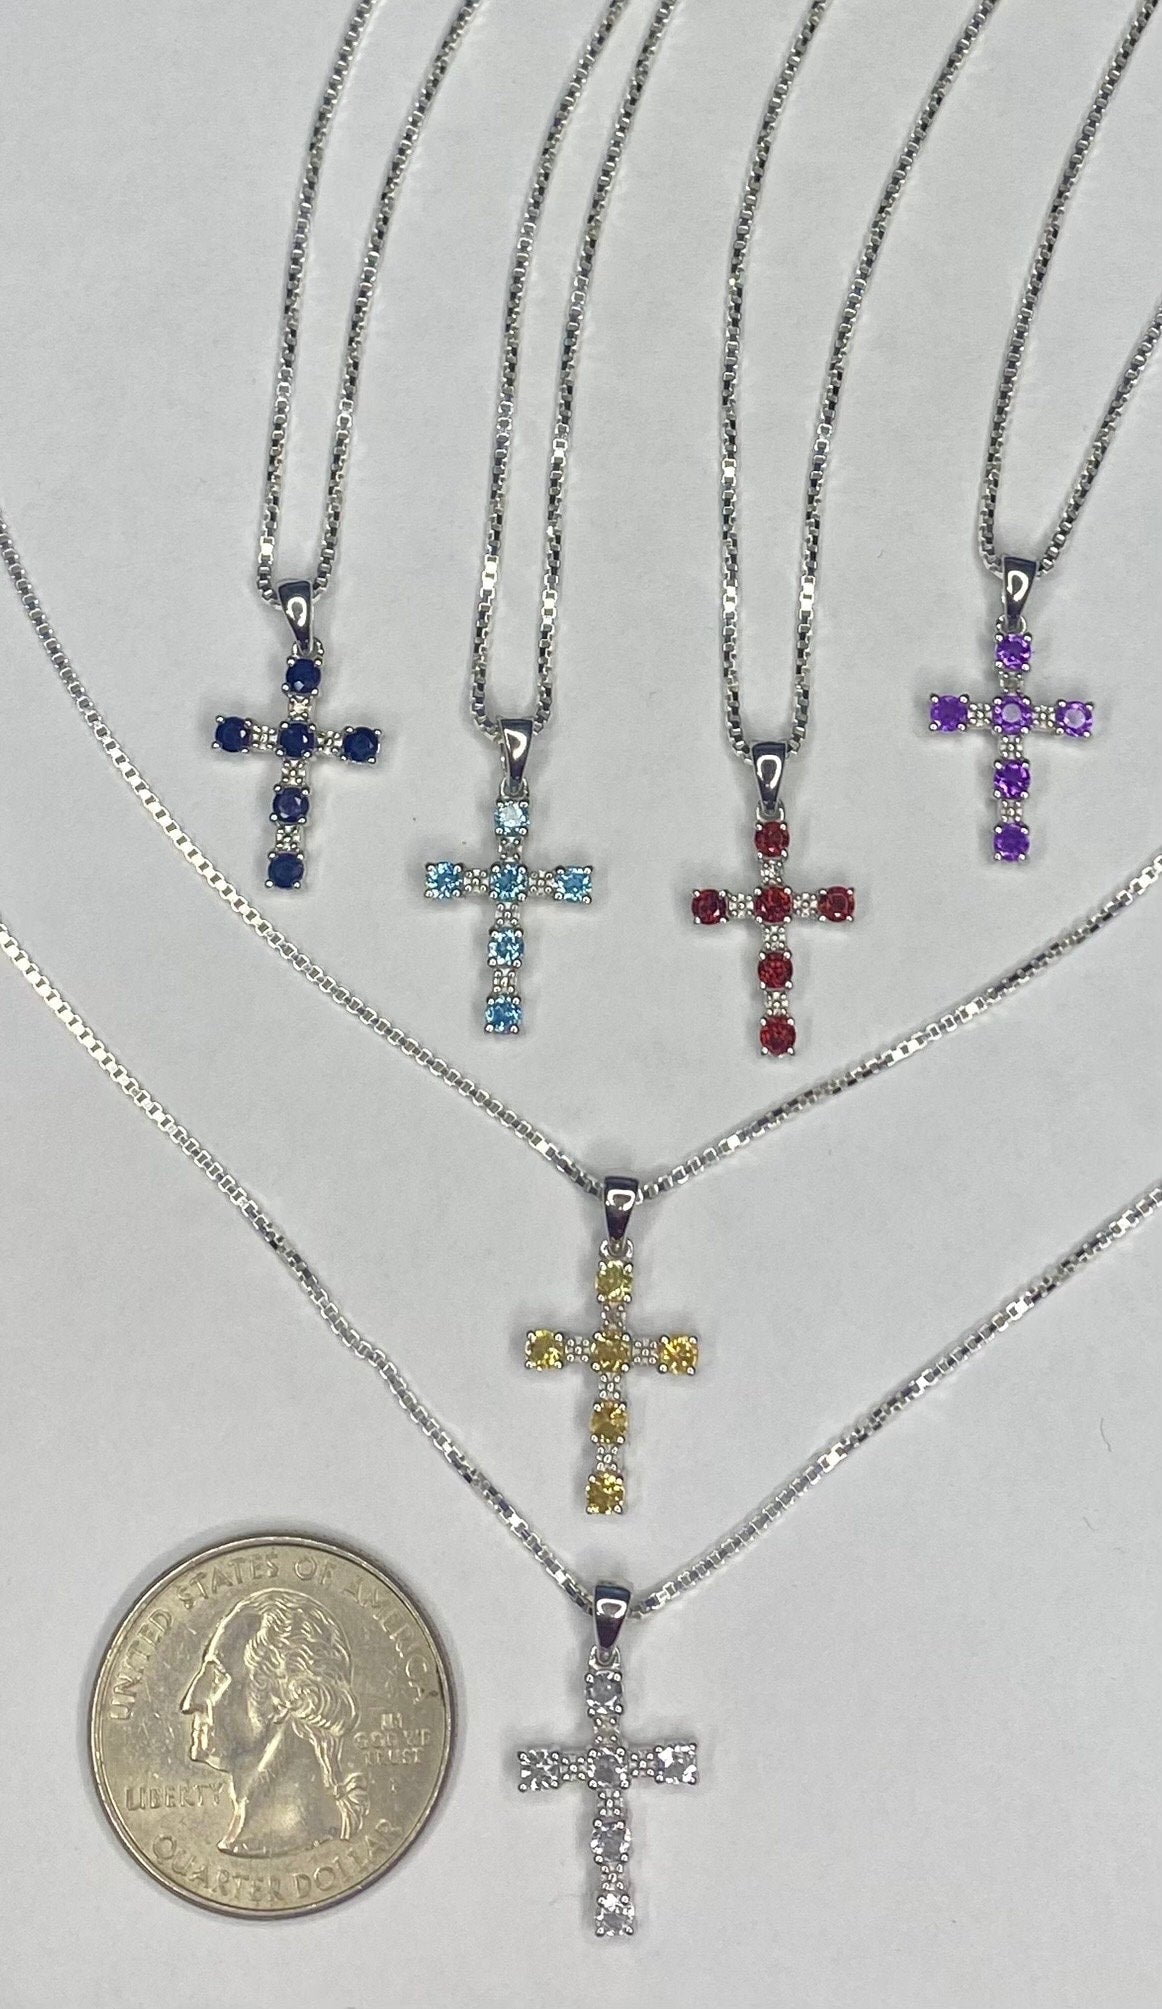 Chain included. Personalized Sterling Silver Birthstone Cross Pendant Charm with a Sturdy Box Necklace